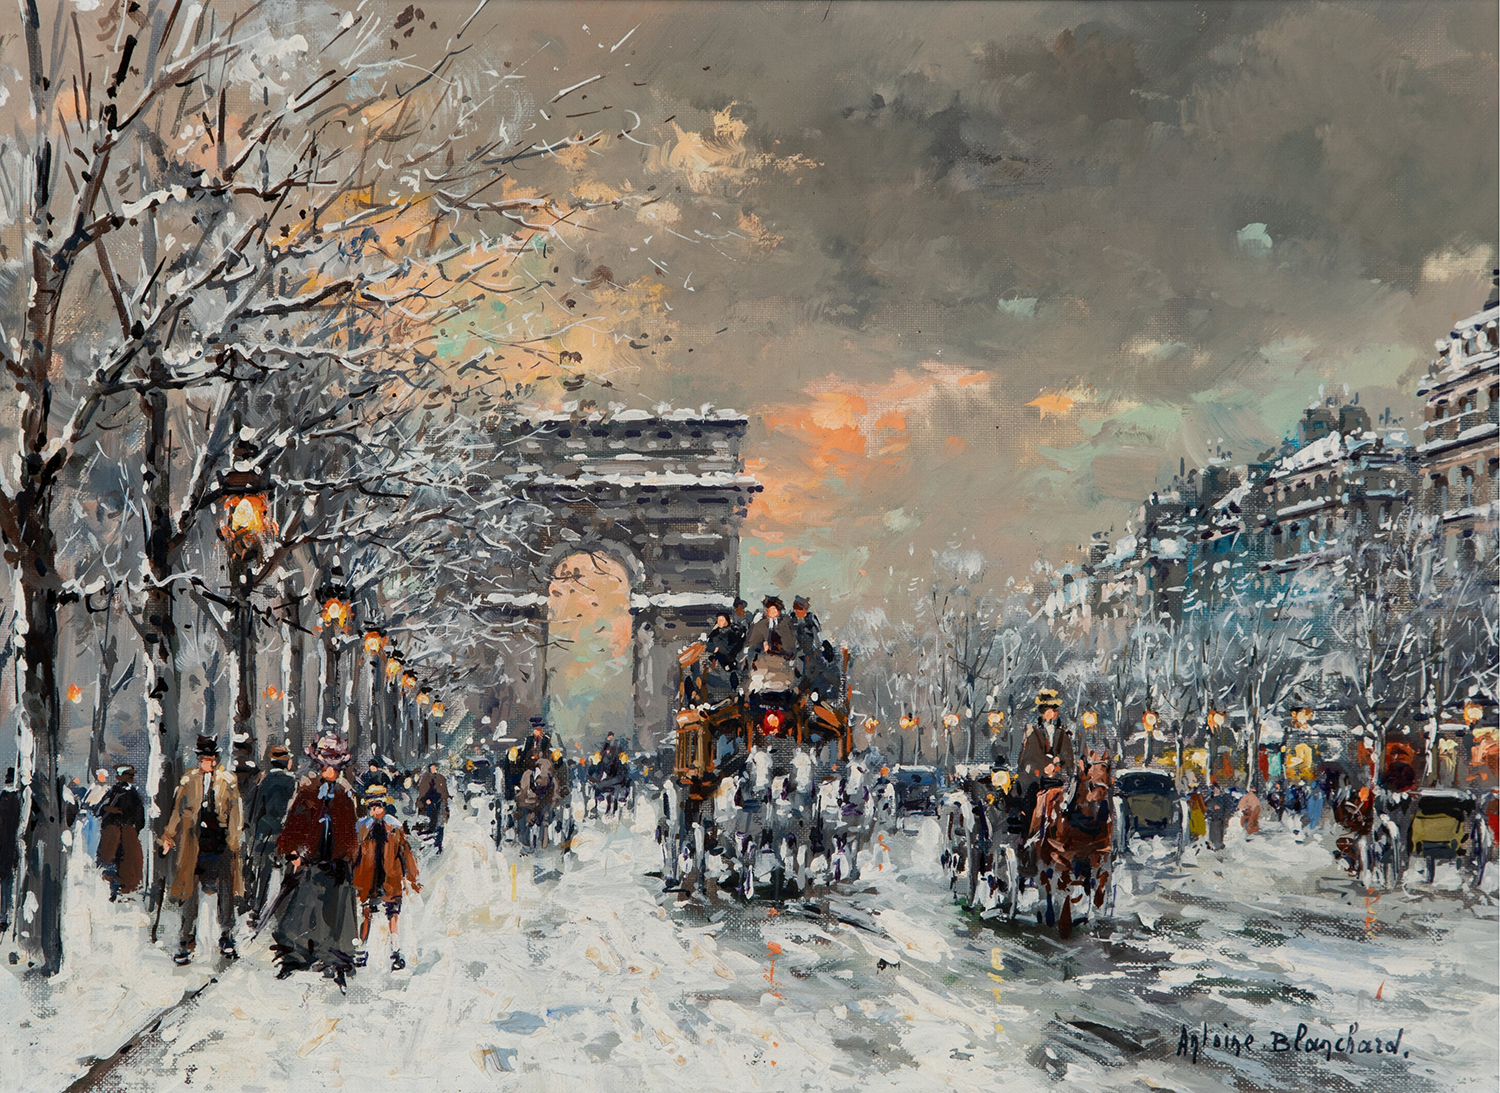 painting of the arc de triomphe in paris in the snow, people and horses in the street